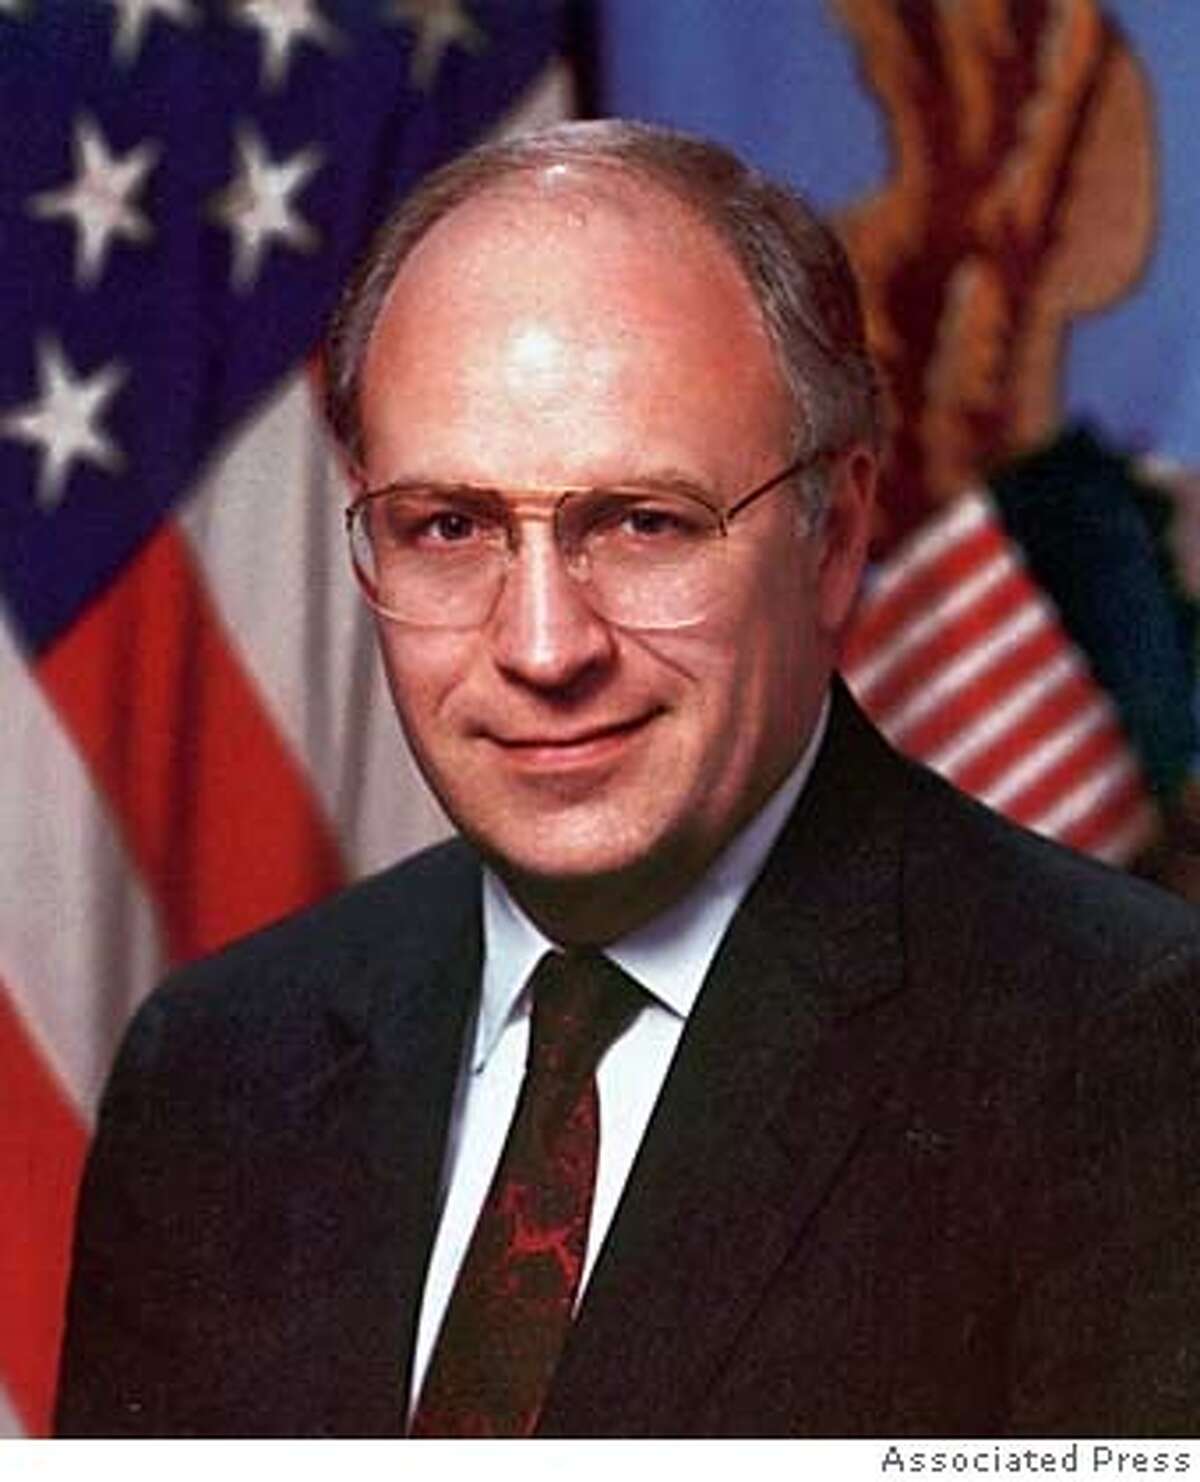 FILE--Former Defense Secretary Dick Cheney is shown in this 1992 file photo. Cheney, who is heading up George W. Bush's vice presidential selection effort, has emerged as the leading candidate for the job, a senior Republican official said Friday, July 21, 2000. The official, speaking on condition of anonymity, said Bush is "very, very close'' to settling on the former Defense Secretary but cautioned that the presumptive Republican nominee has not made a final decision. (AP Photo/file) CAT